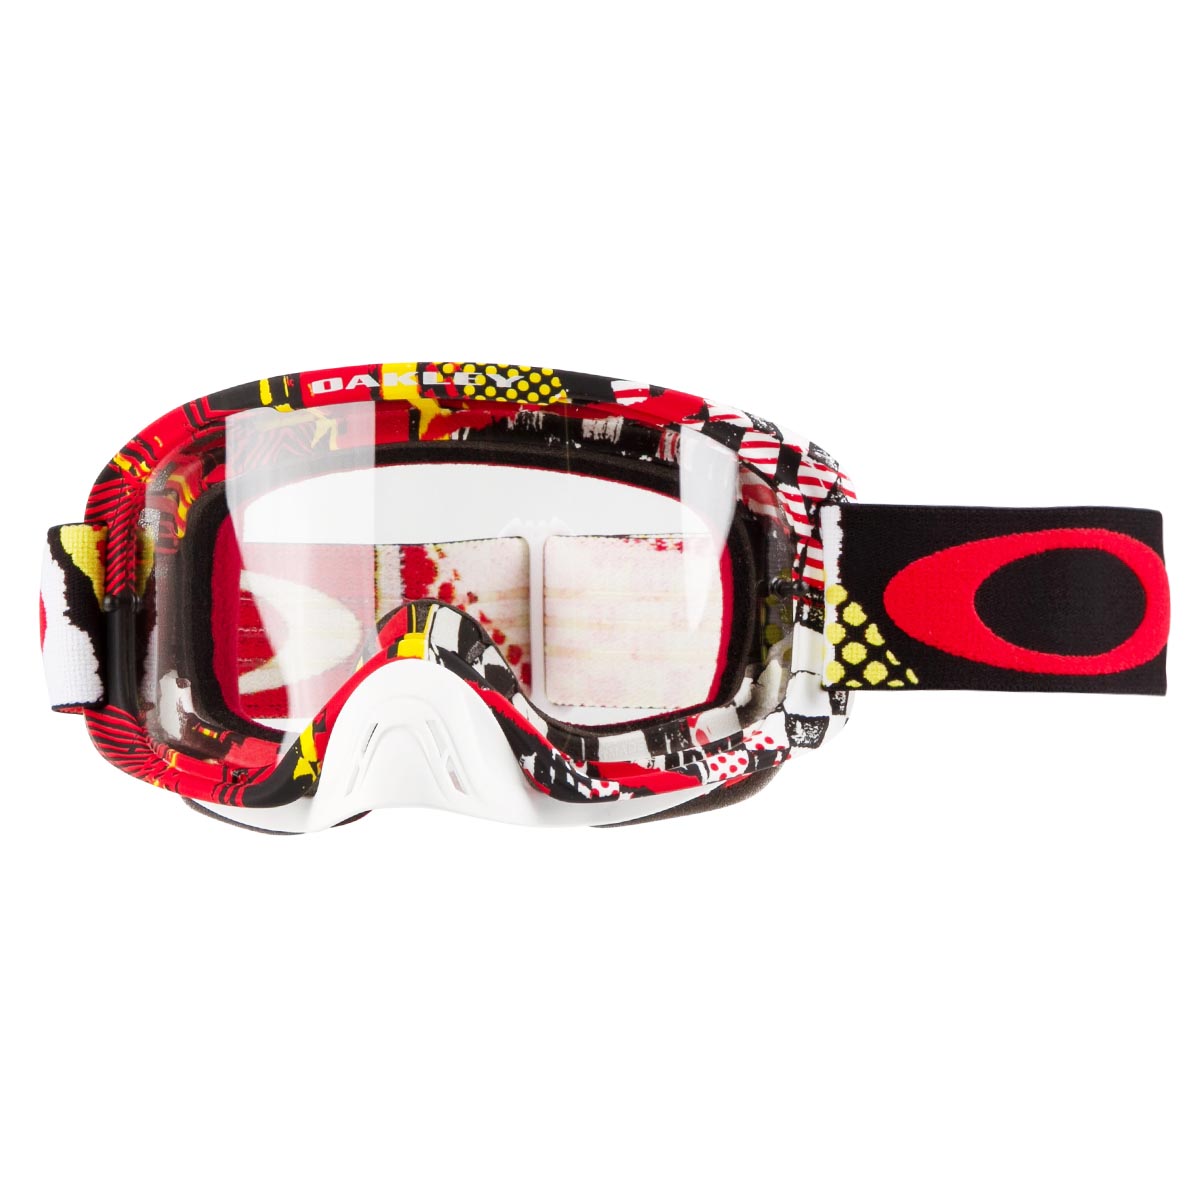 Oakley Goggle O2 MX Mosh Pit Red/Yellow - Clear